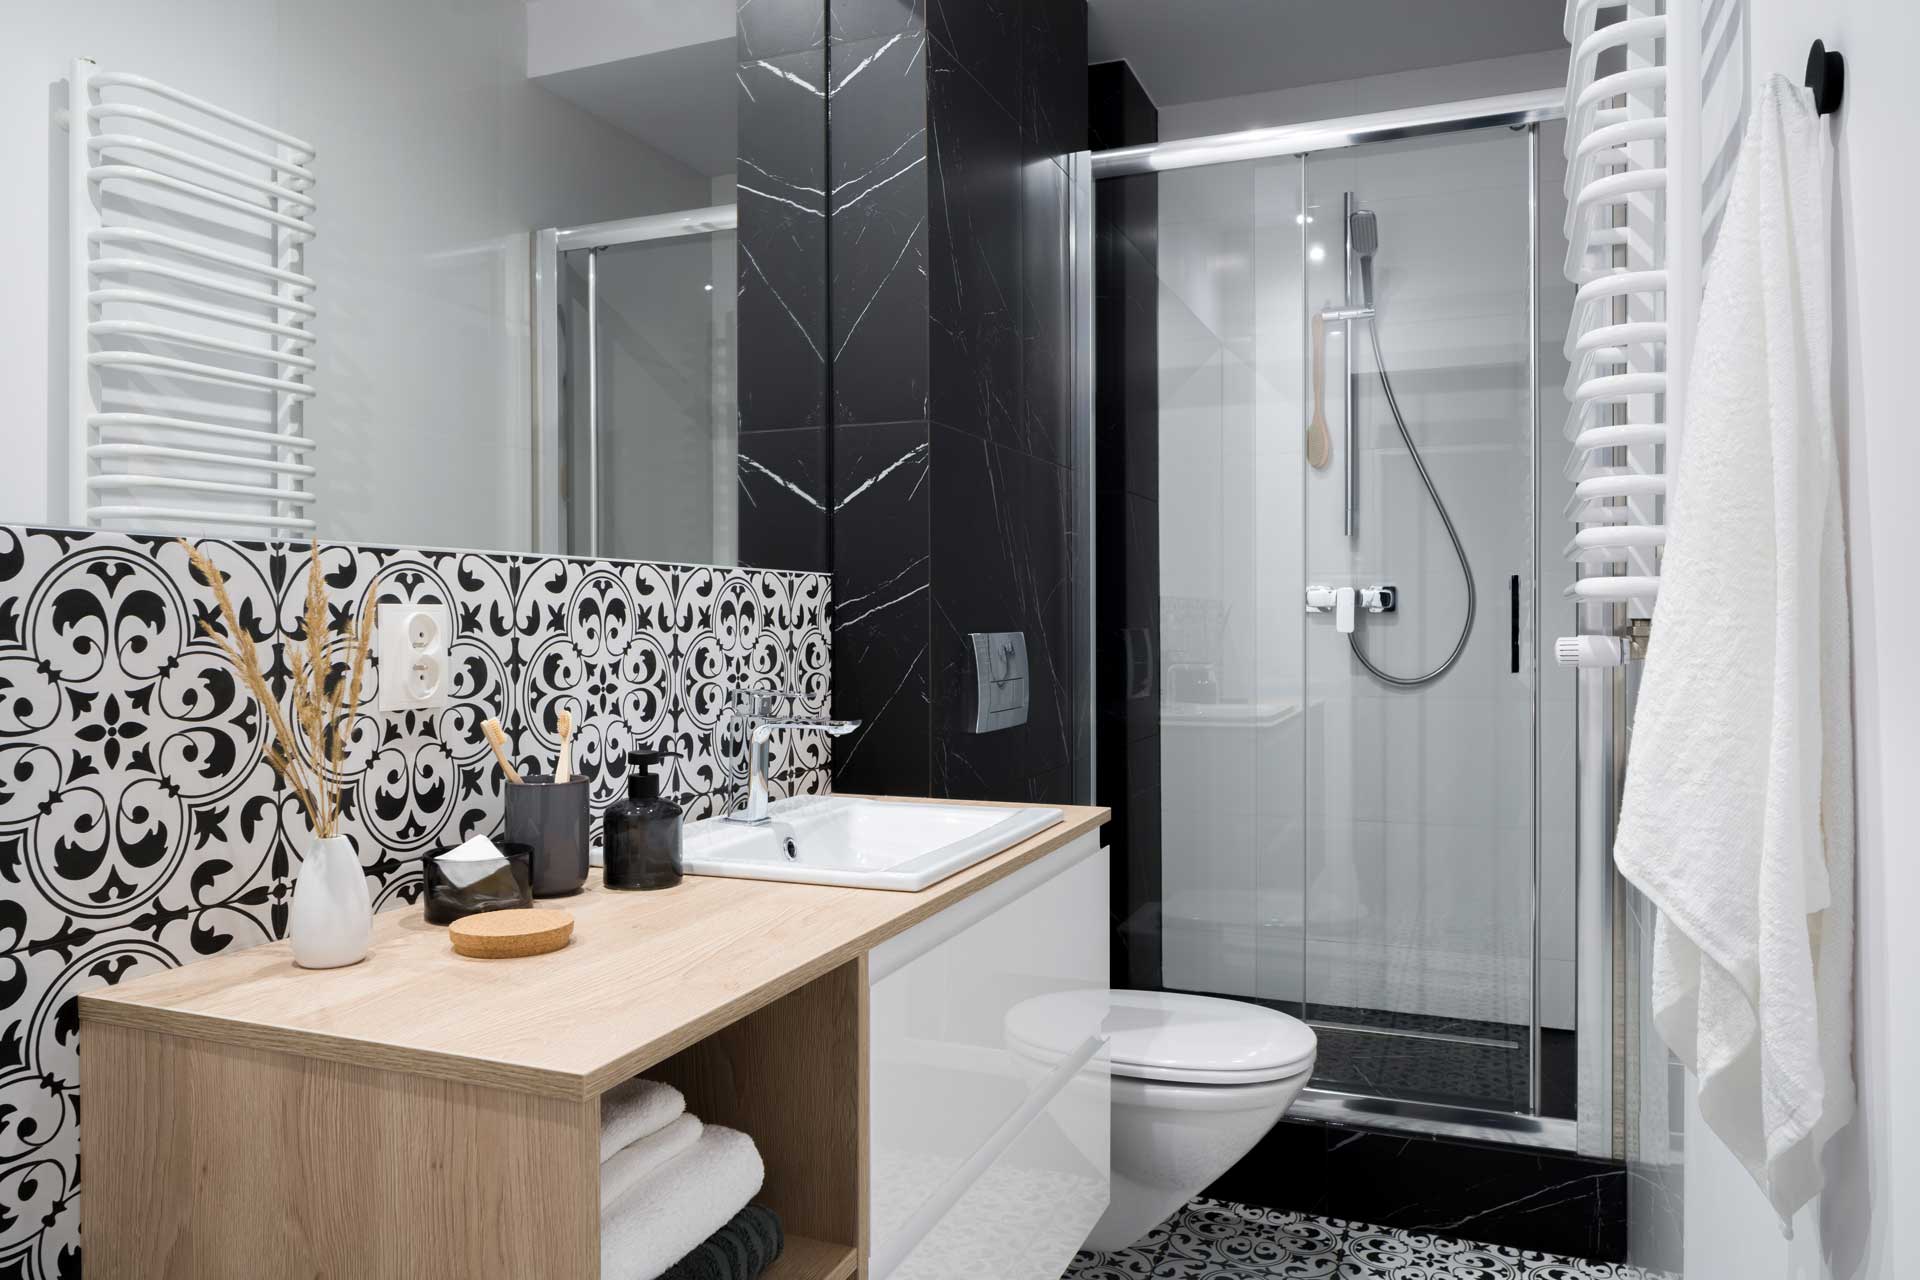 6 Plumbing Facts that Can Make or Break Your Bathroom Remodel